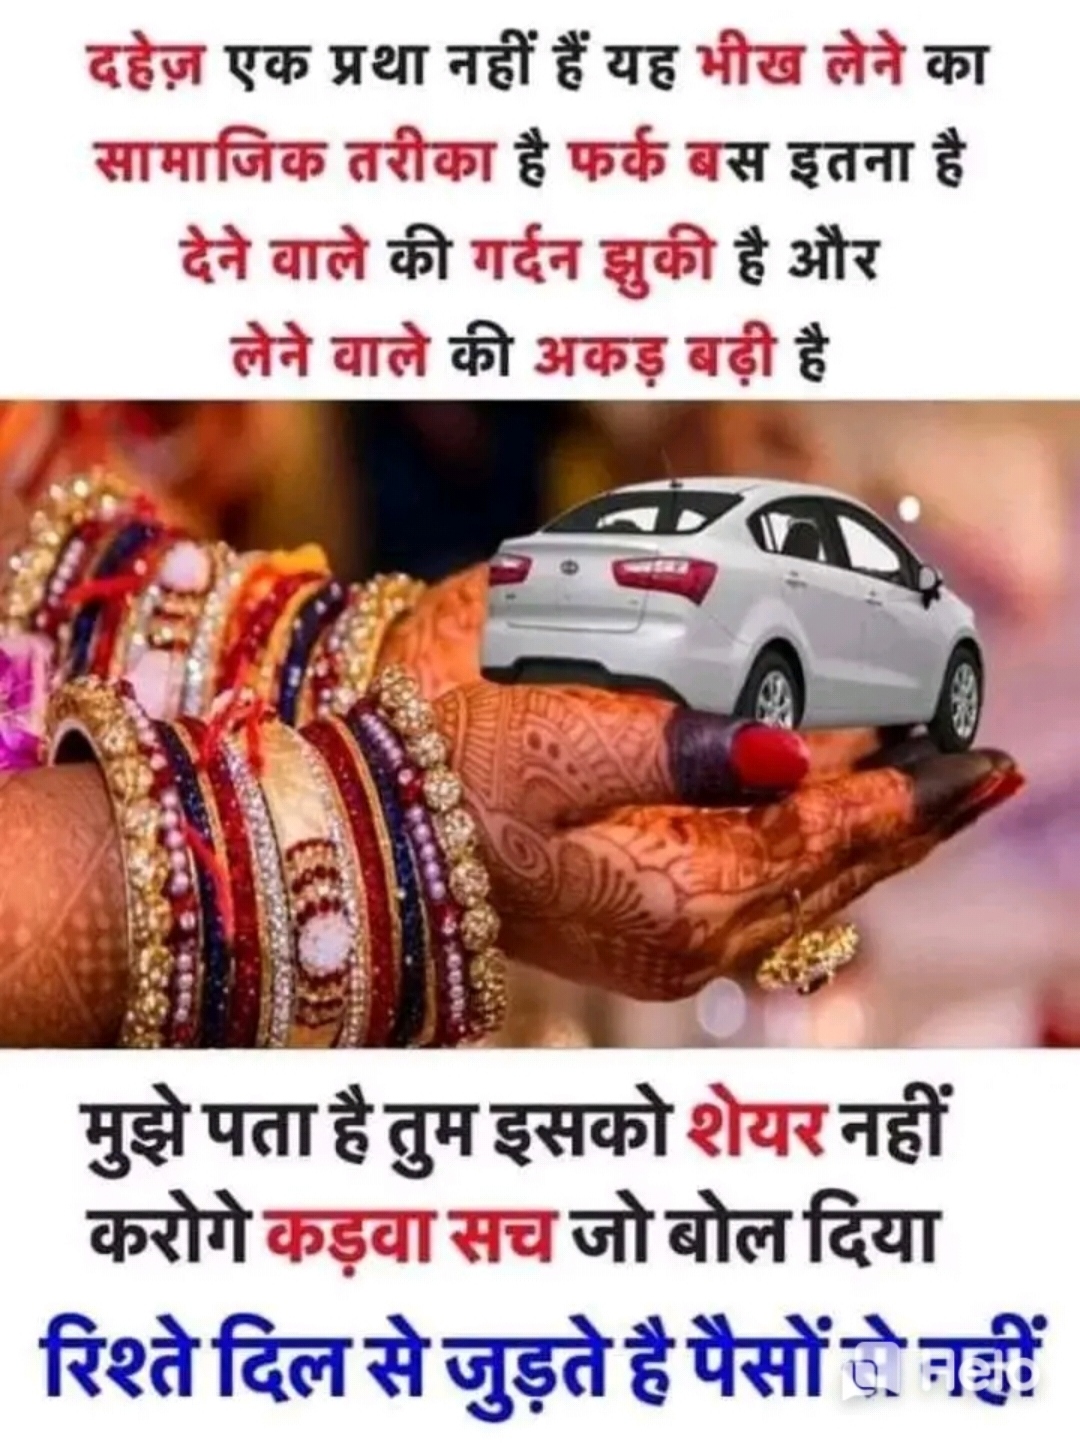 dowry system • ShareChat Photos and Videos